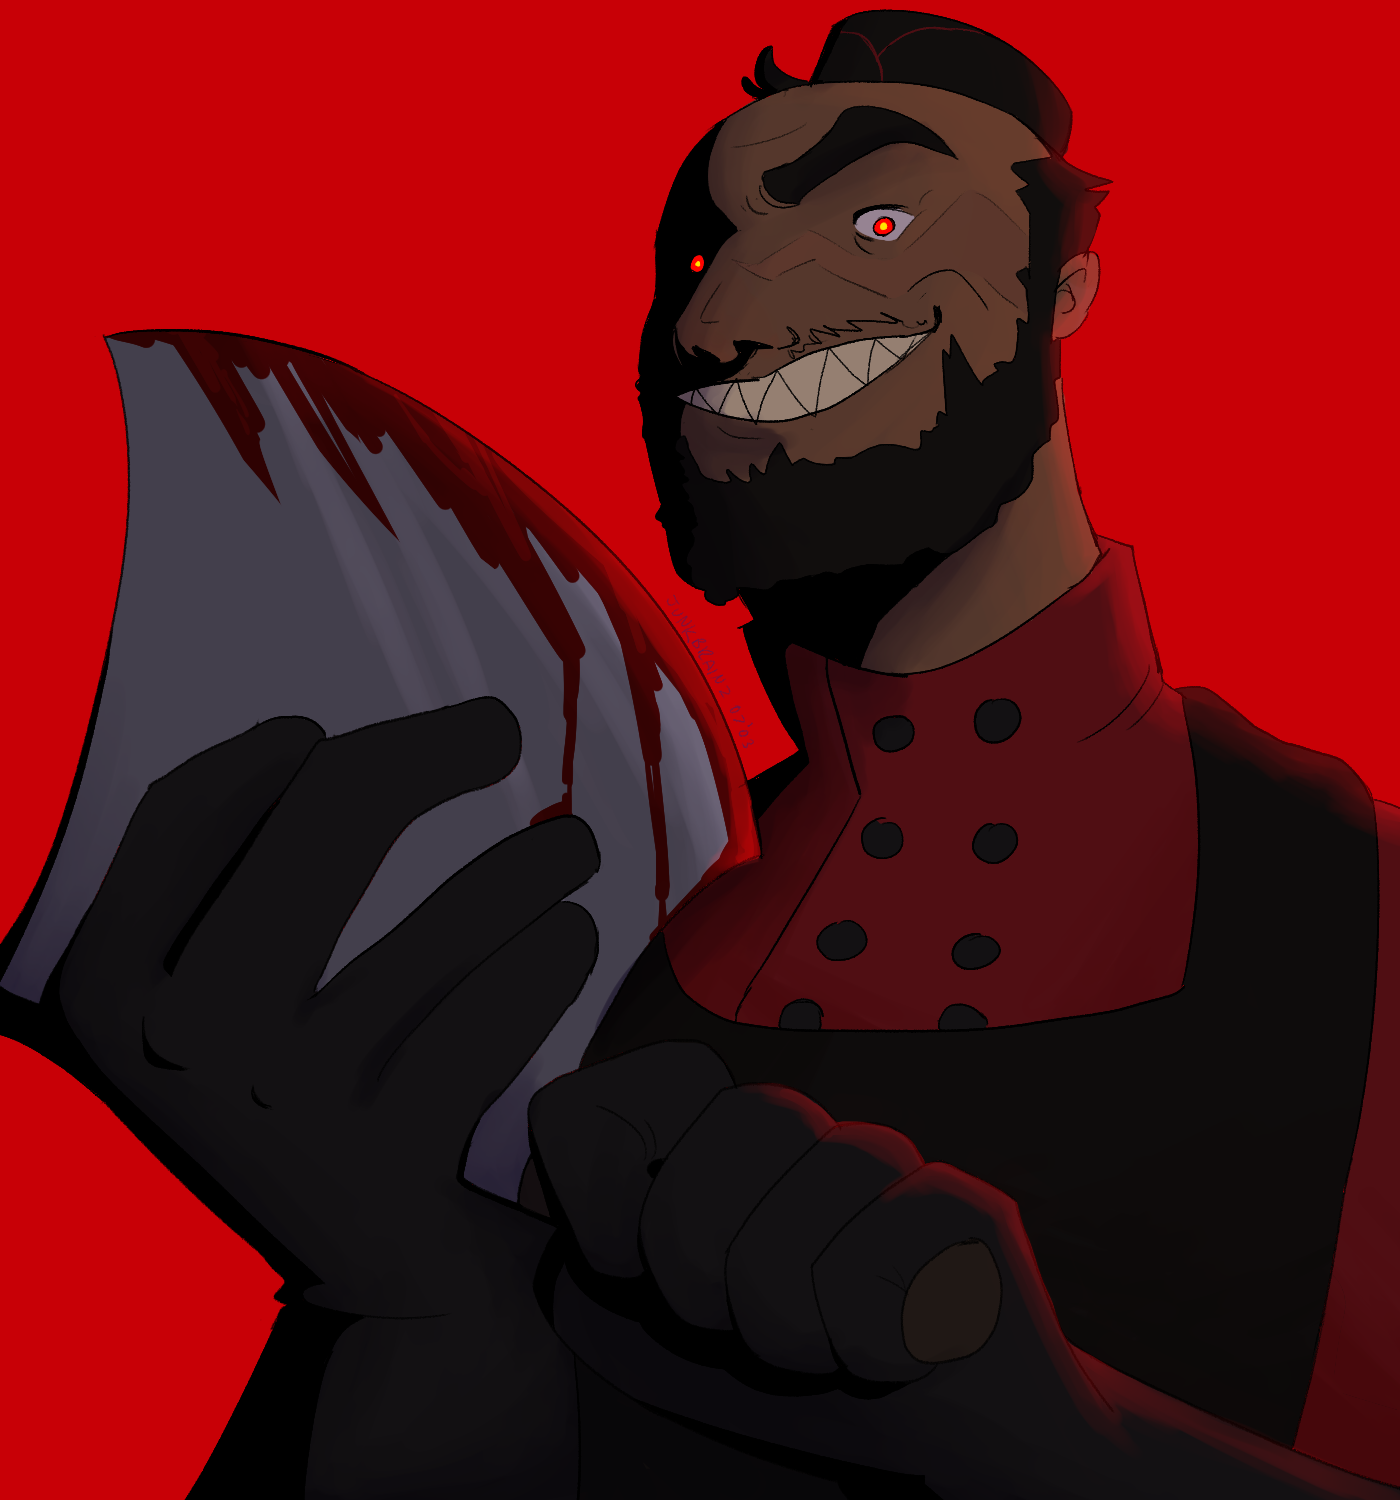 butcher smiling menacingly at the camera while holding his knife